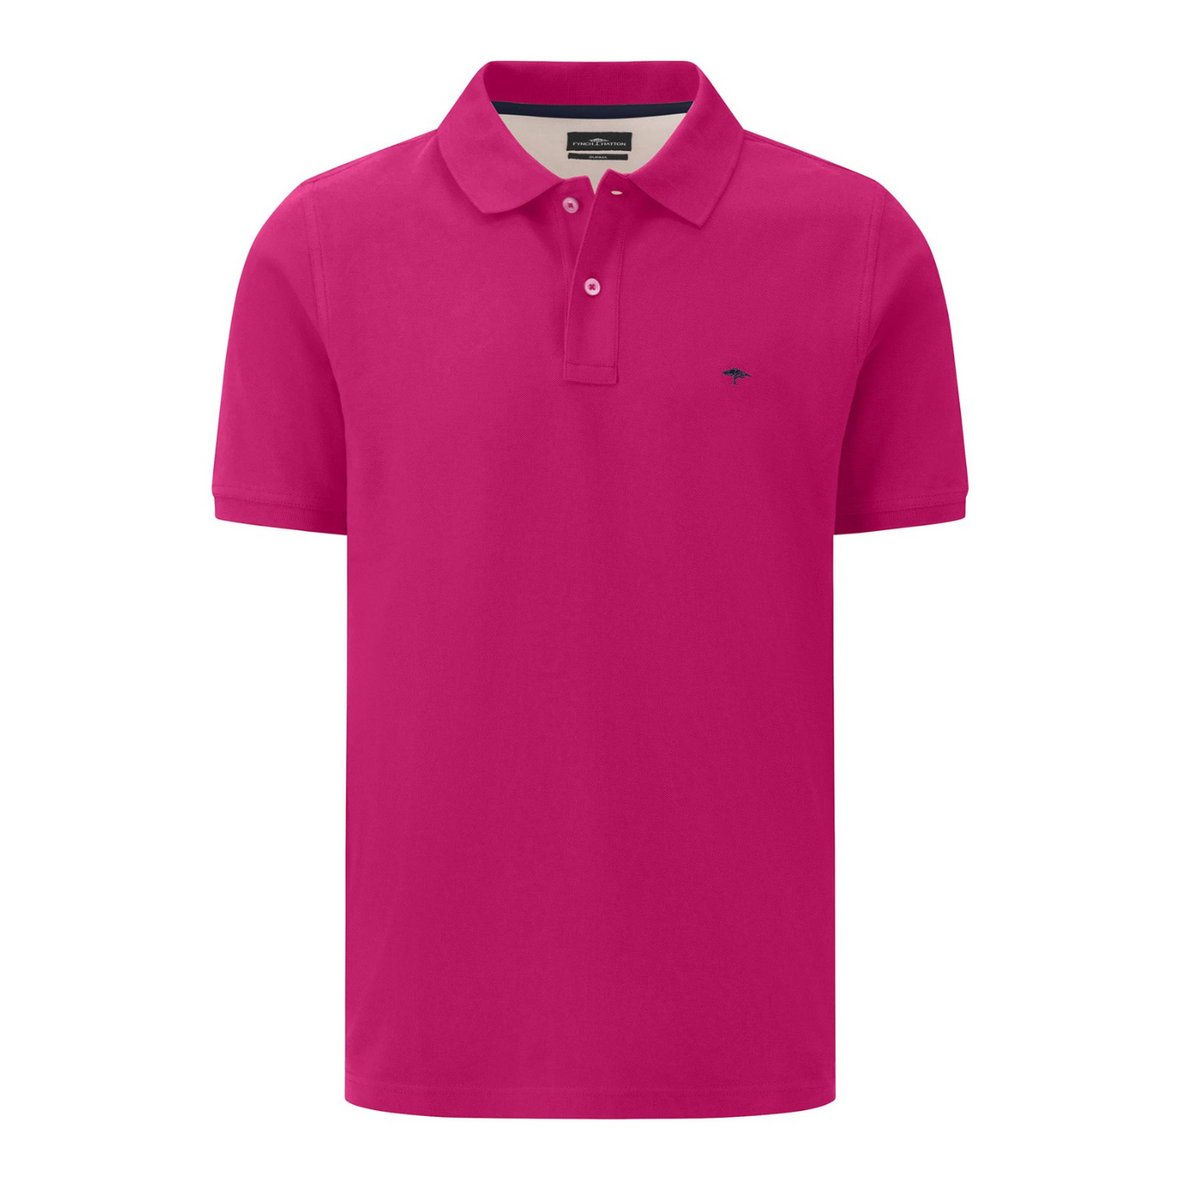 Front view of the Fynch Hatton Polo Shirt in Malaga